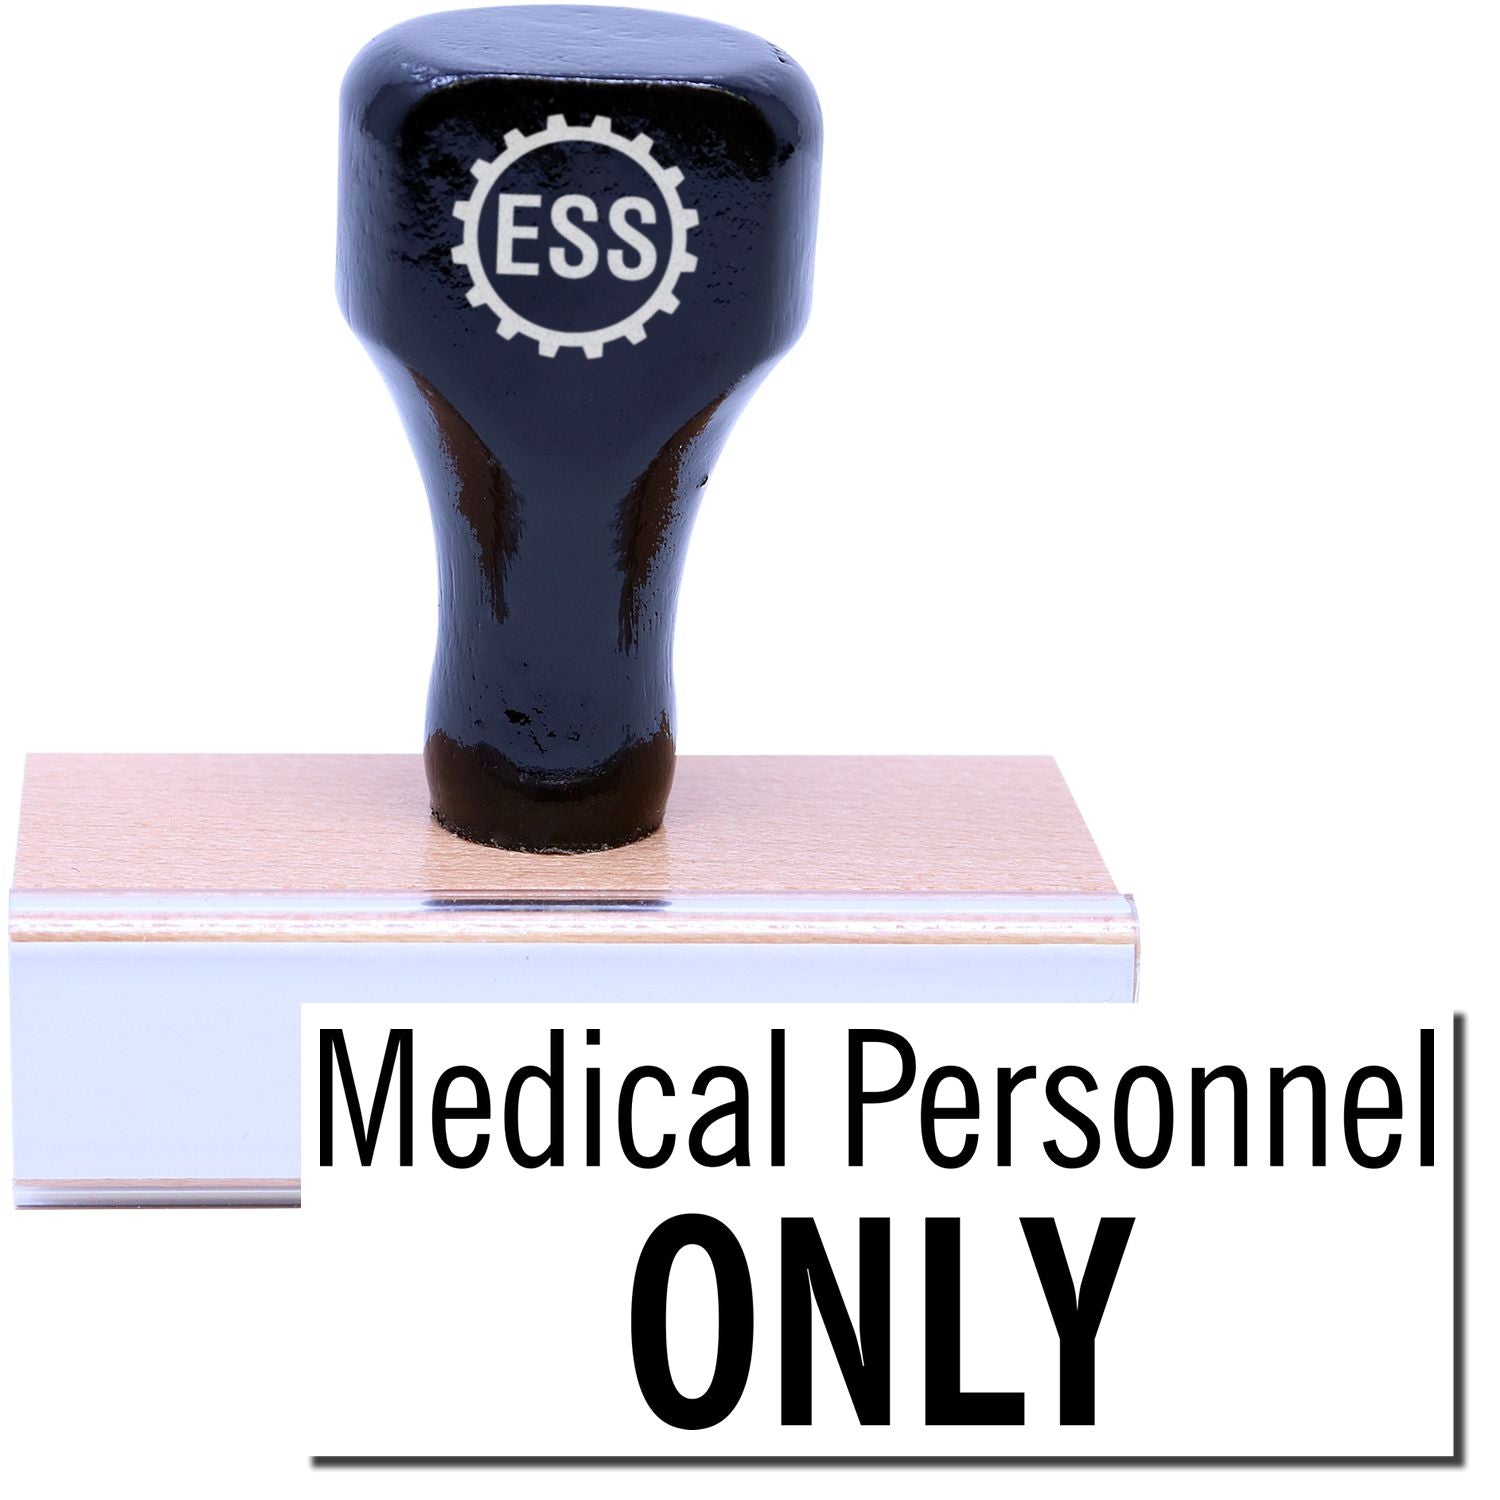 A stock office rubber stamp with a stamped image showing how the text "Medical Personnel ONLY" in a large font is displayed after stamping.